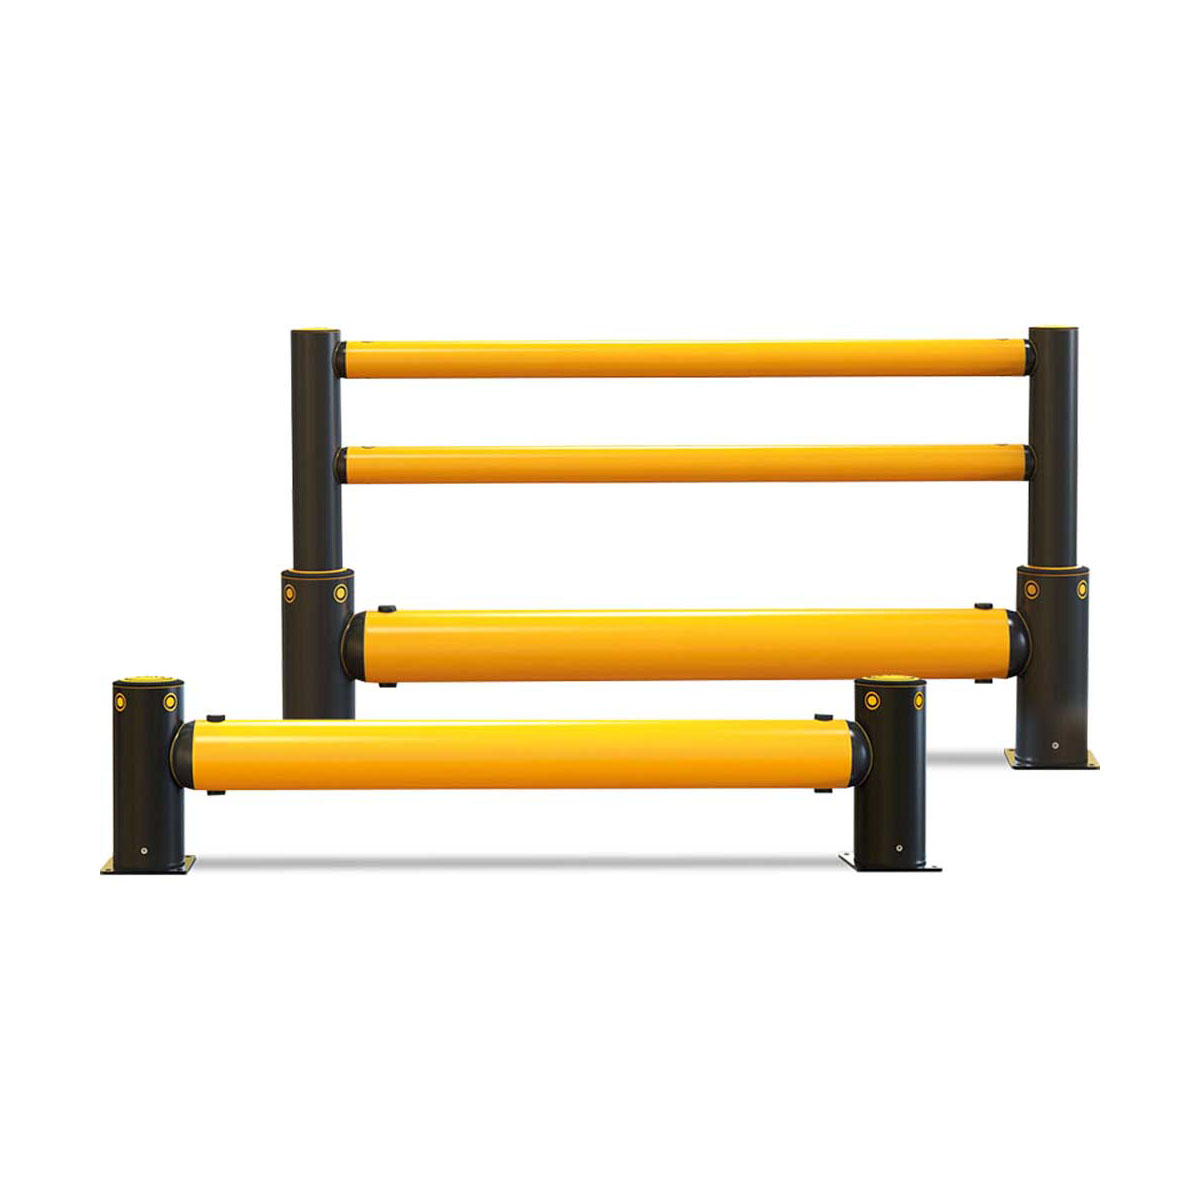 Buy Traffic Barrier - A-Safe (Flexible Plastic) in Traffic Barriers from A-Safe available at Astrolift NZ